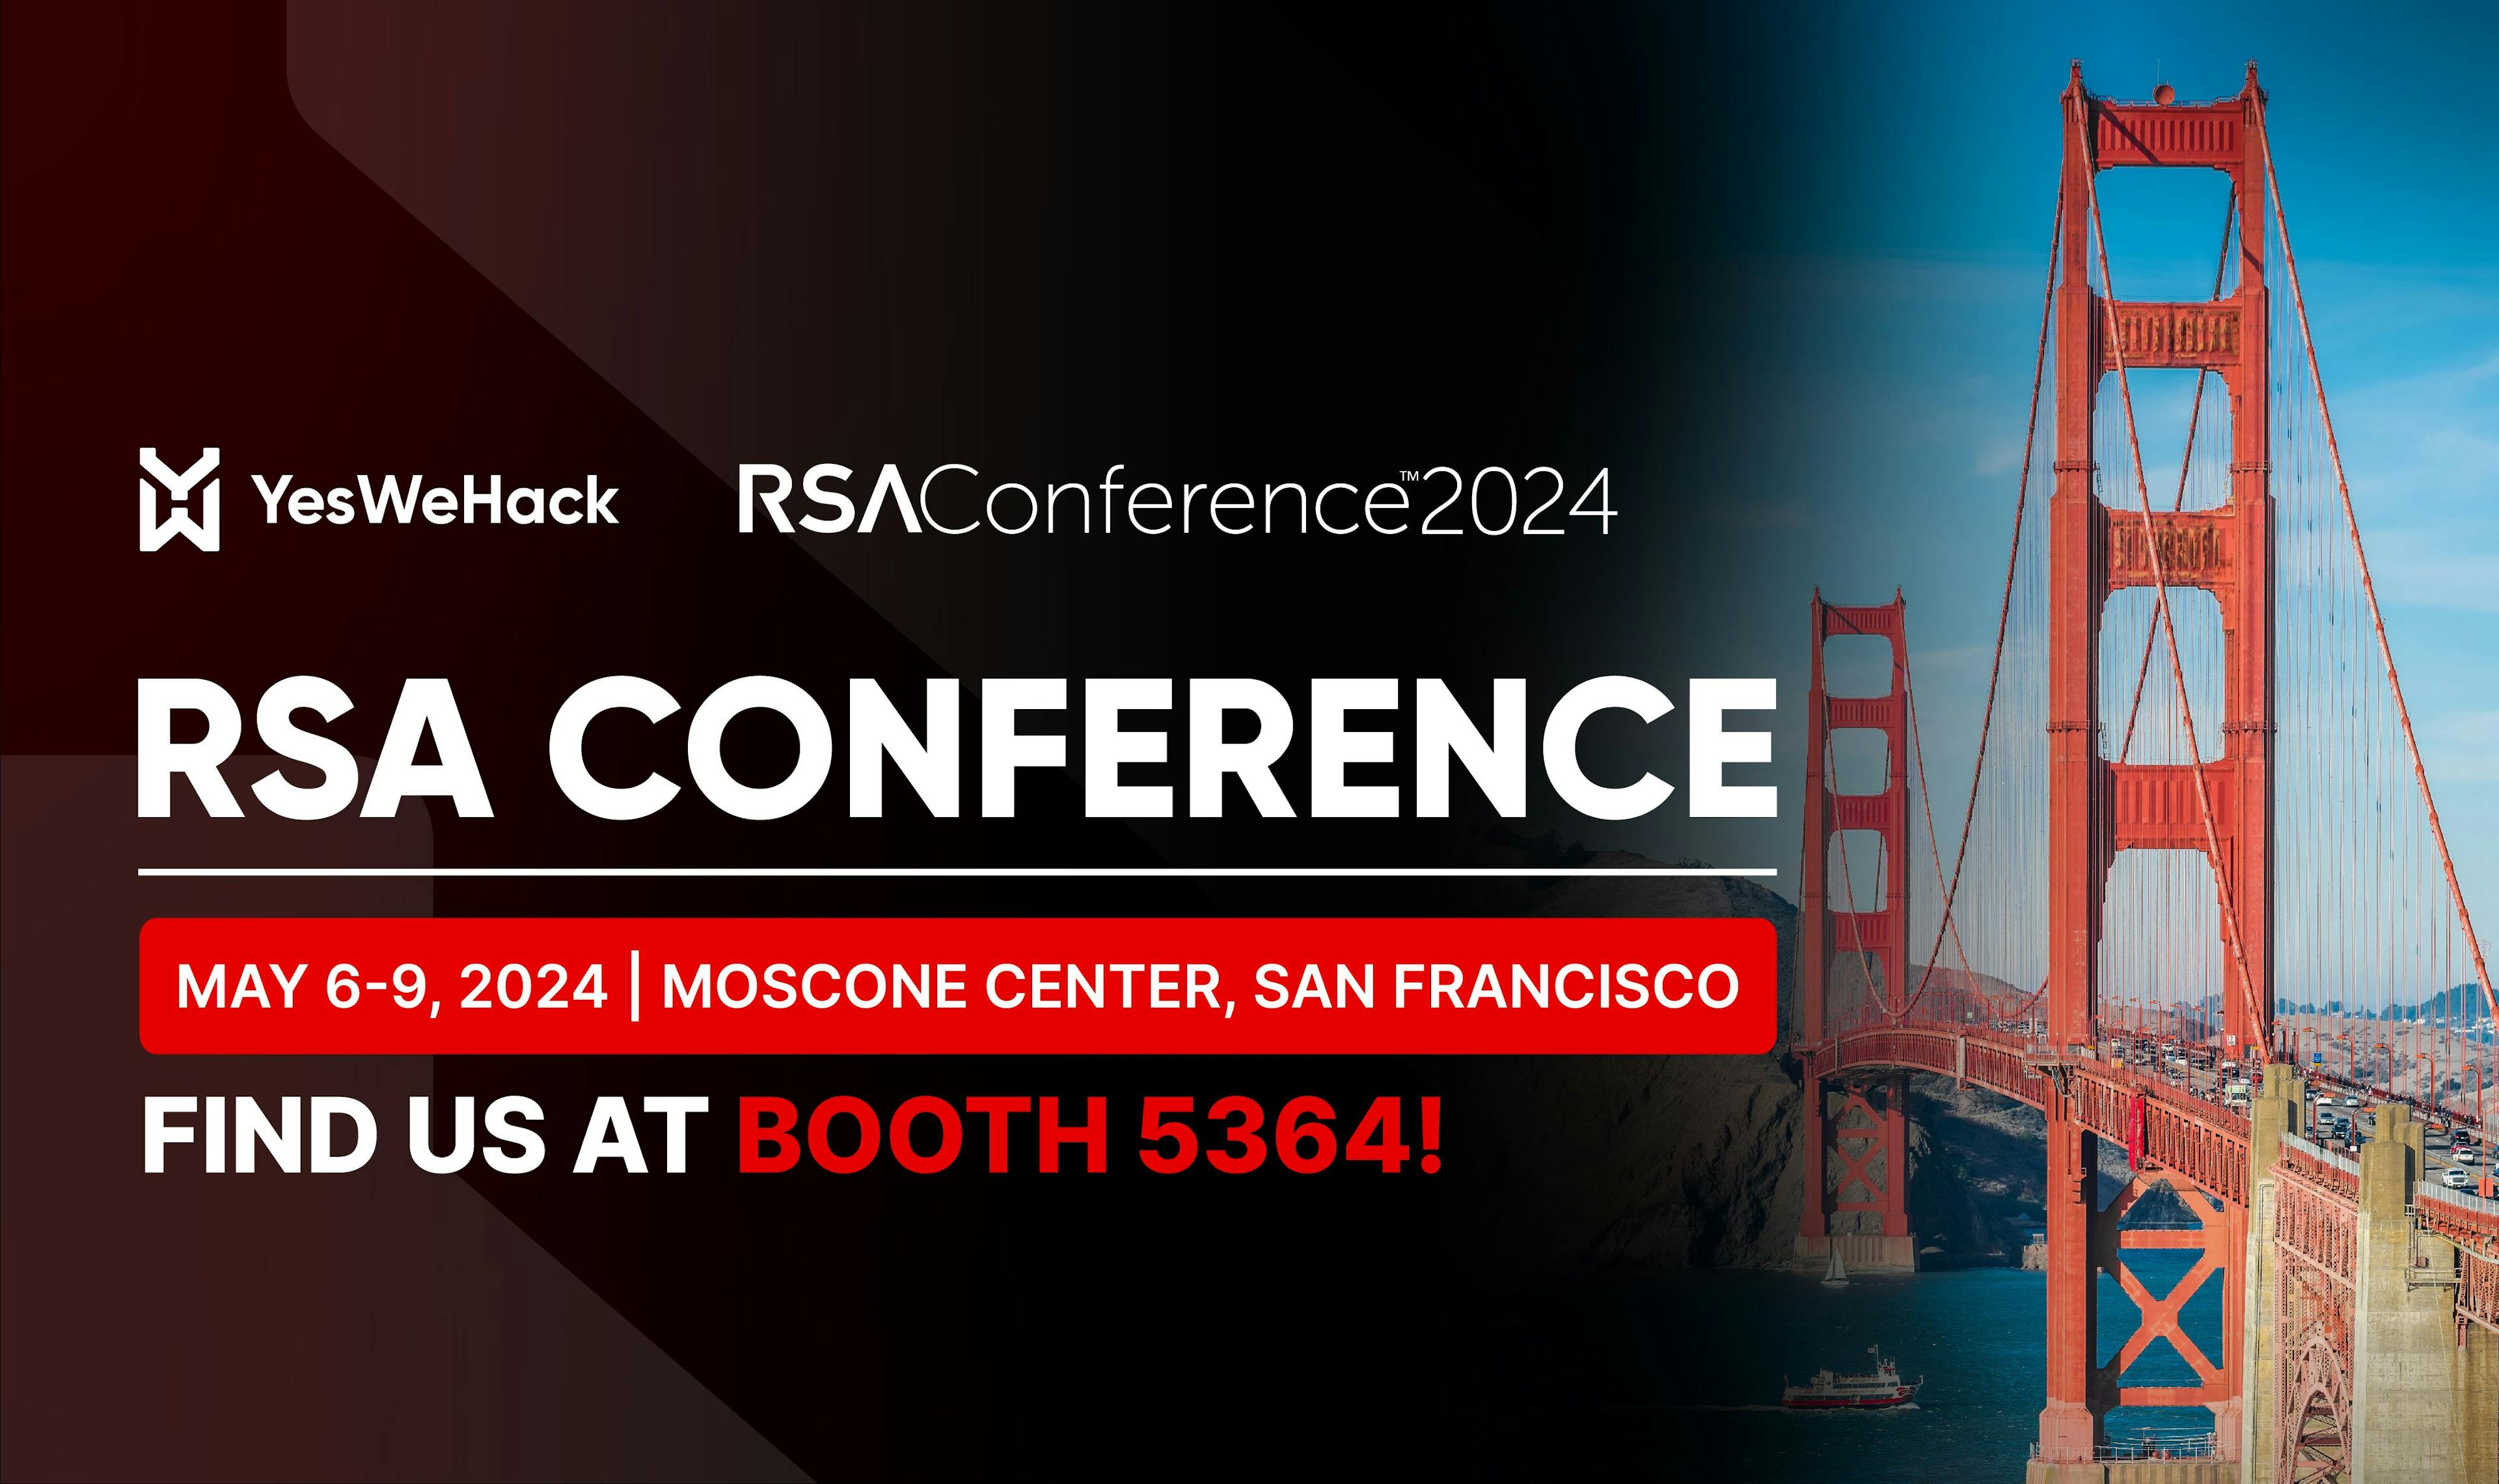 Visit booth 5364 during RSA Conference 2024 to chat with the YesWeHack team.